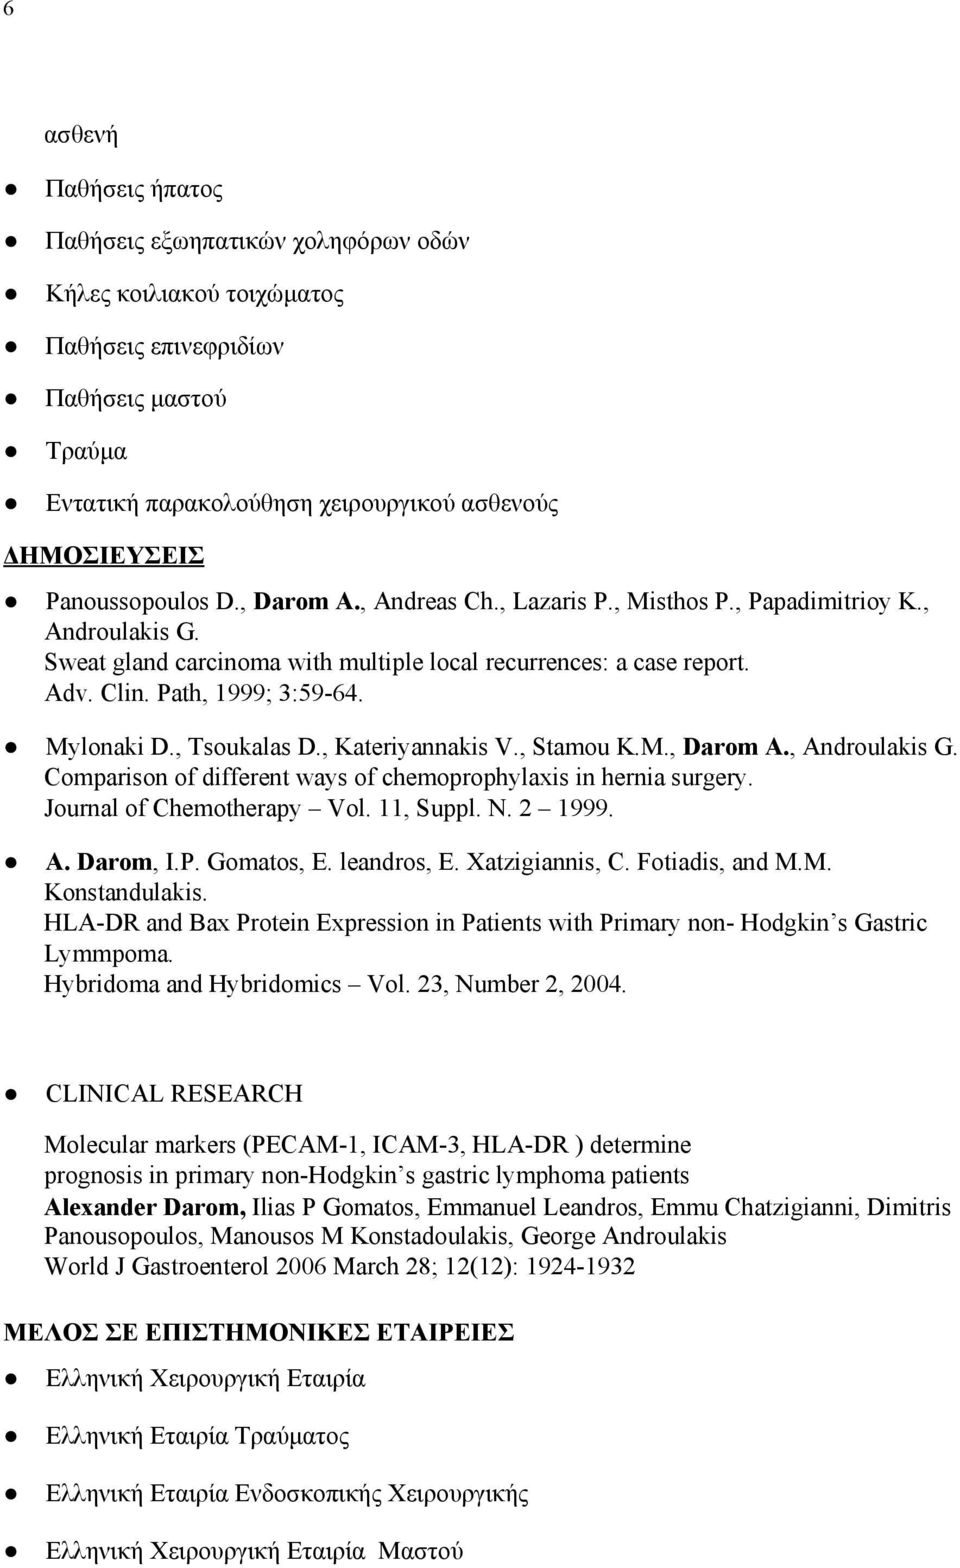 Mylonaki D., Tsoukalas D., Kateriyannakis V., Stamou K.M., Darom A., Androulakis G. Comparison of different ways of chemoprophylaxis in hernia surgery. Journal of Chemotherapy Vol. 11, Suppl. N.